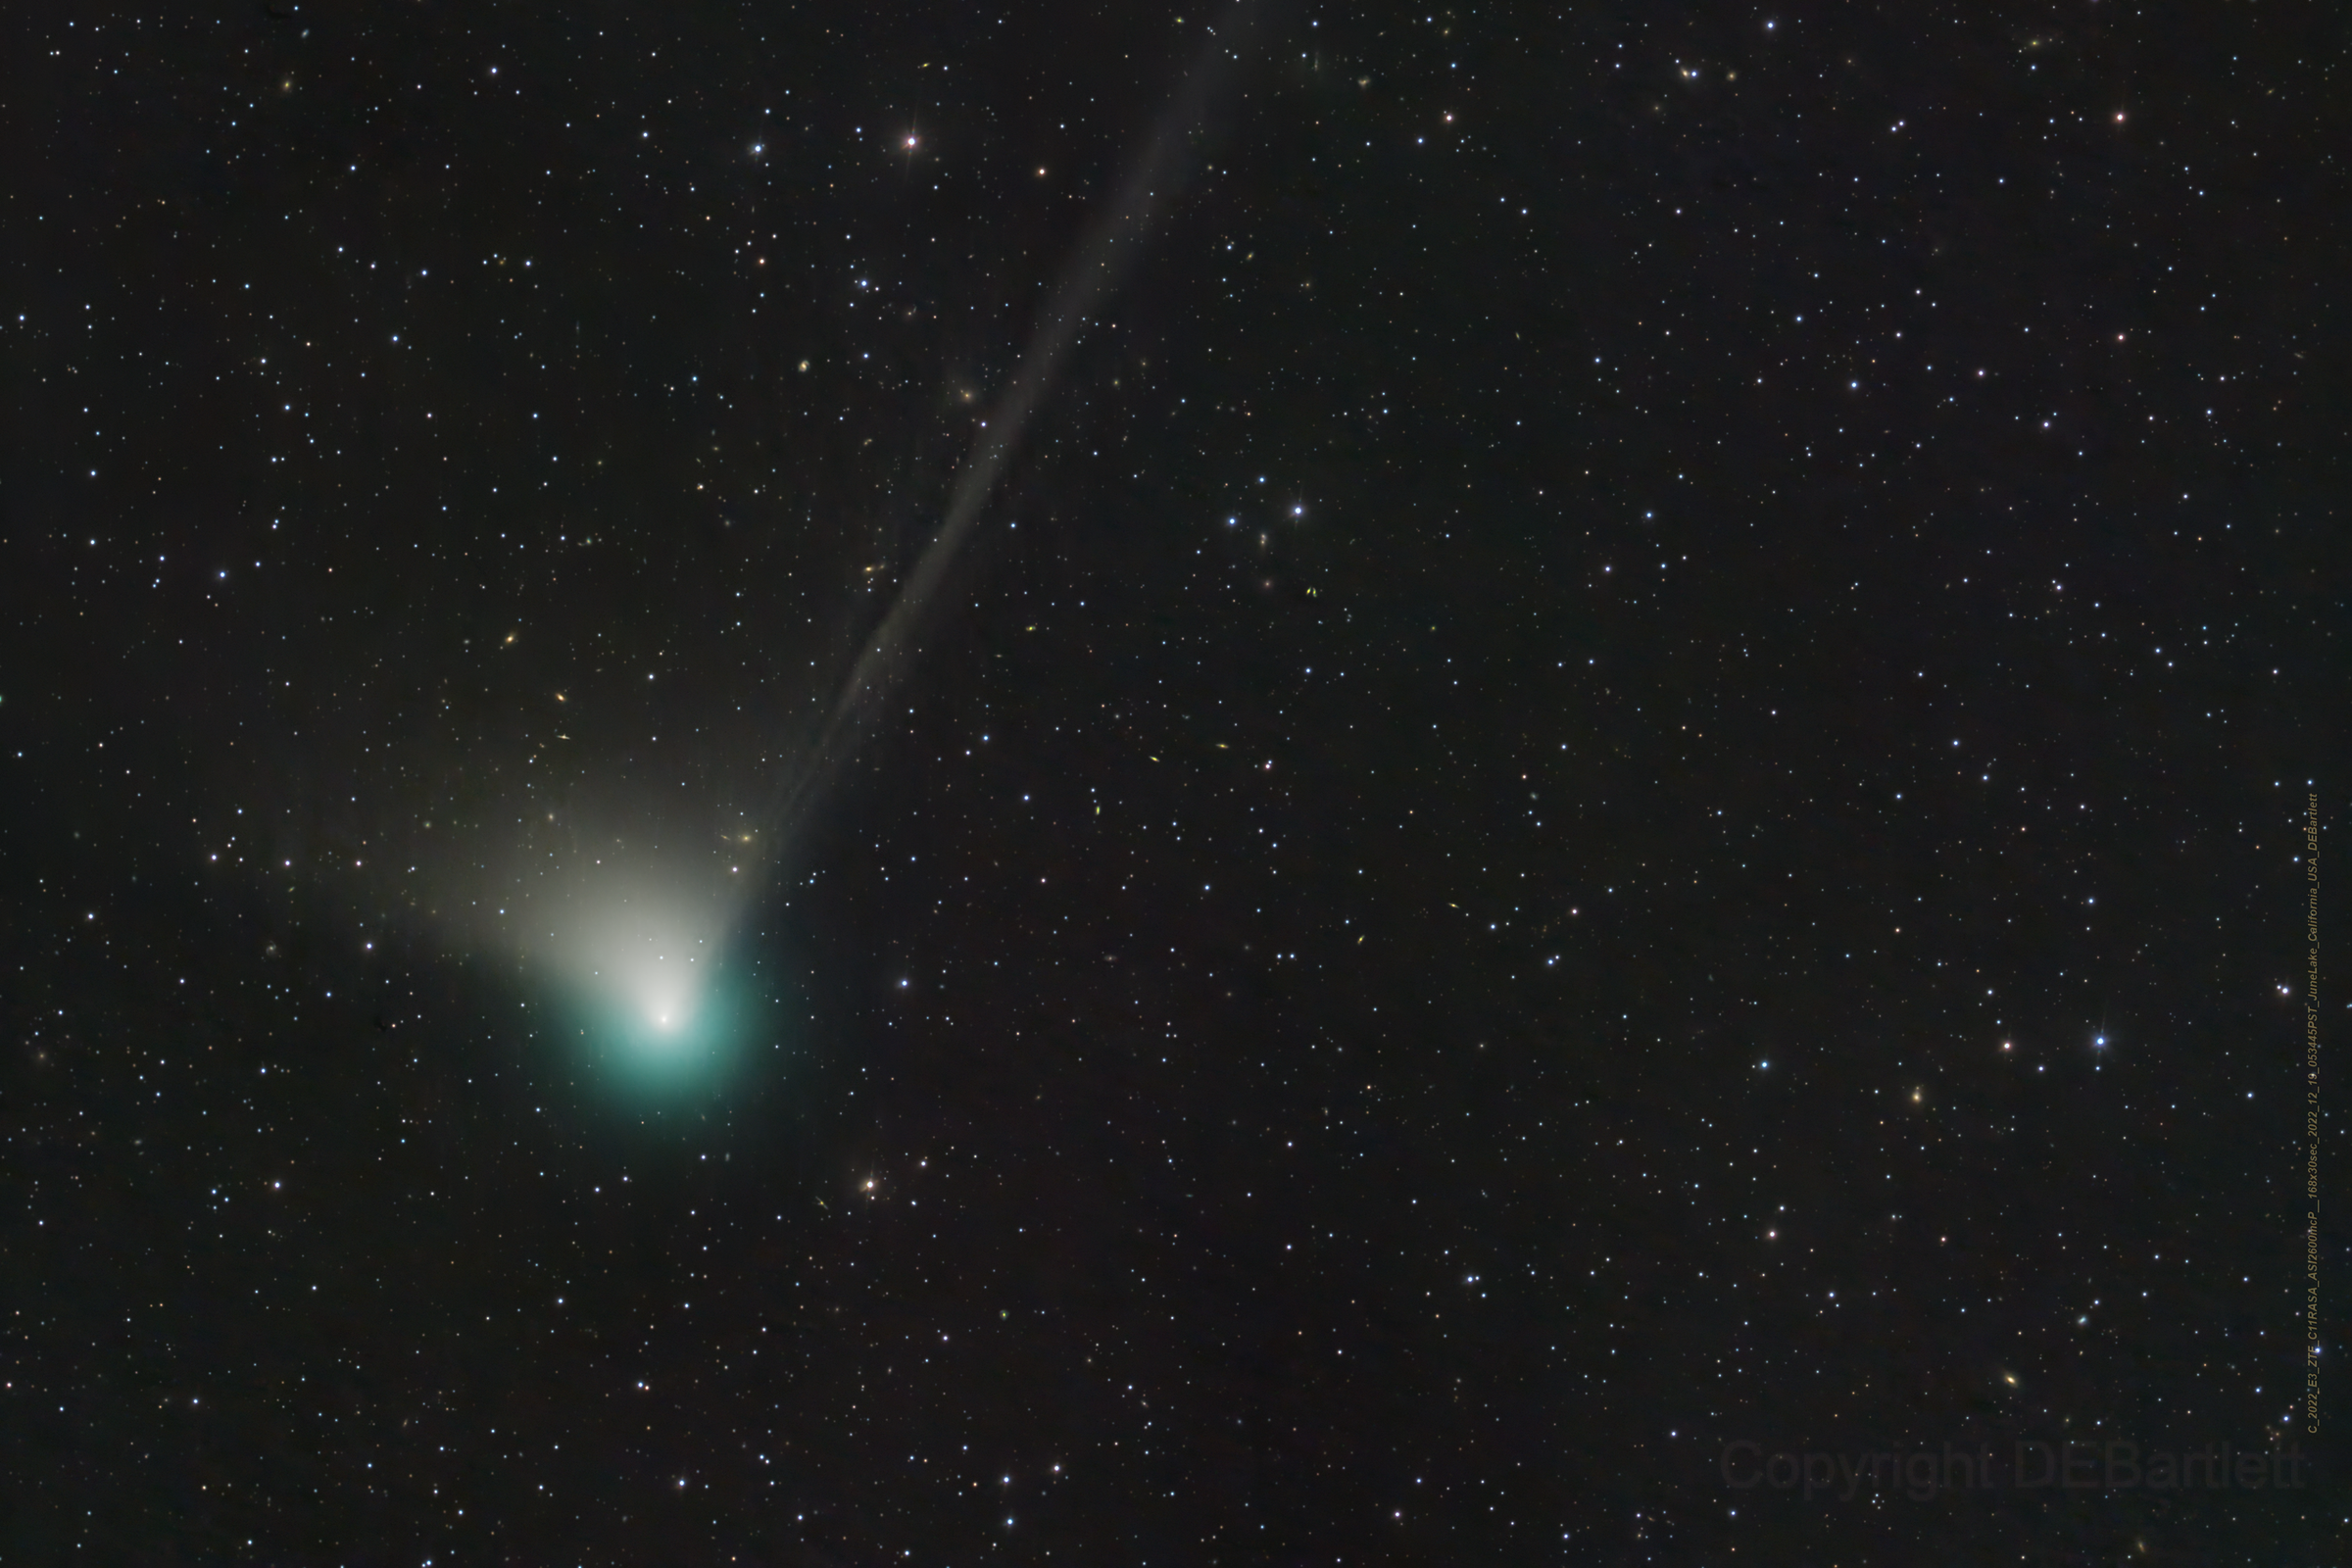 A comet glows white and green.